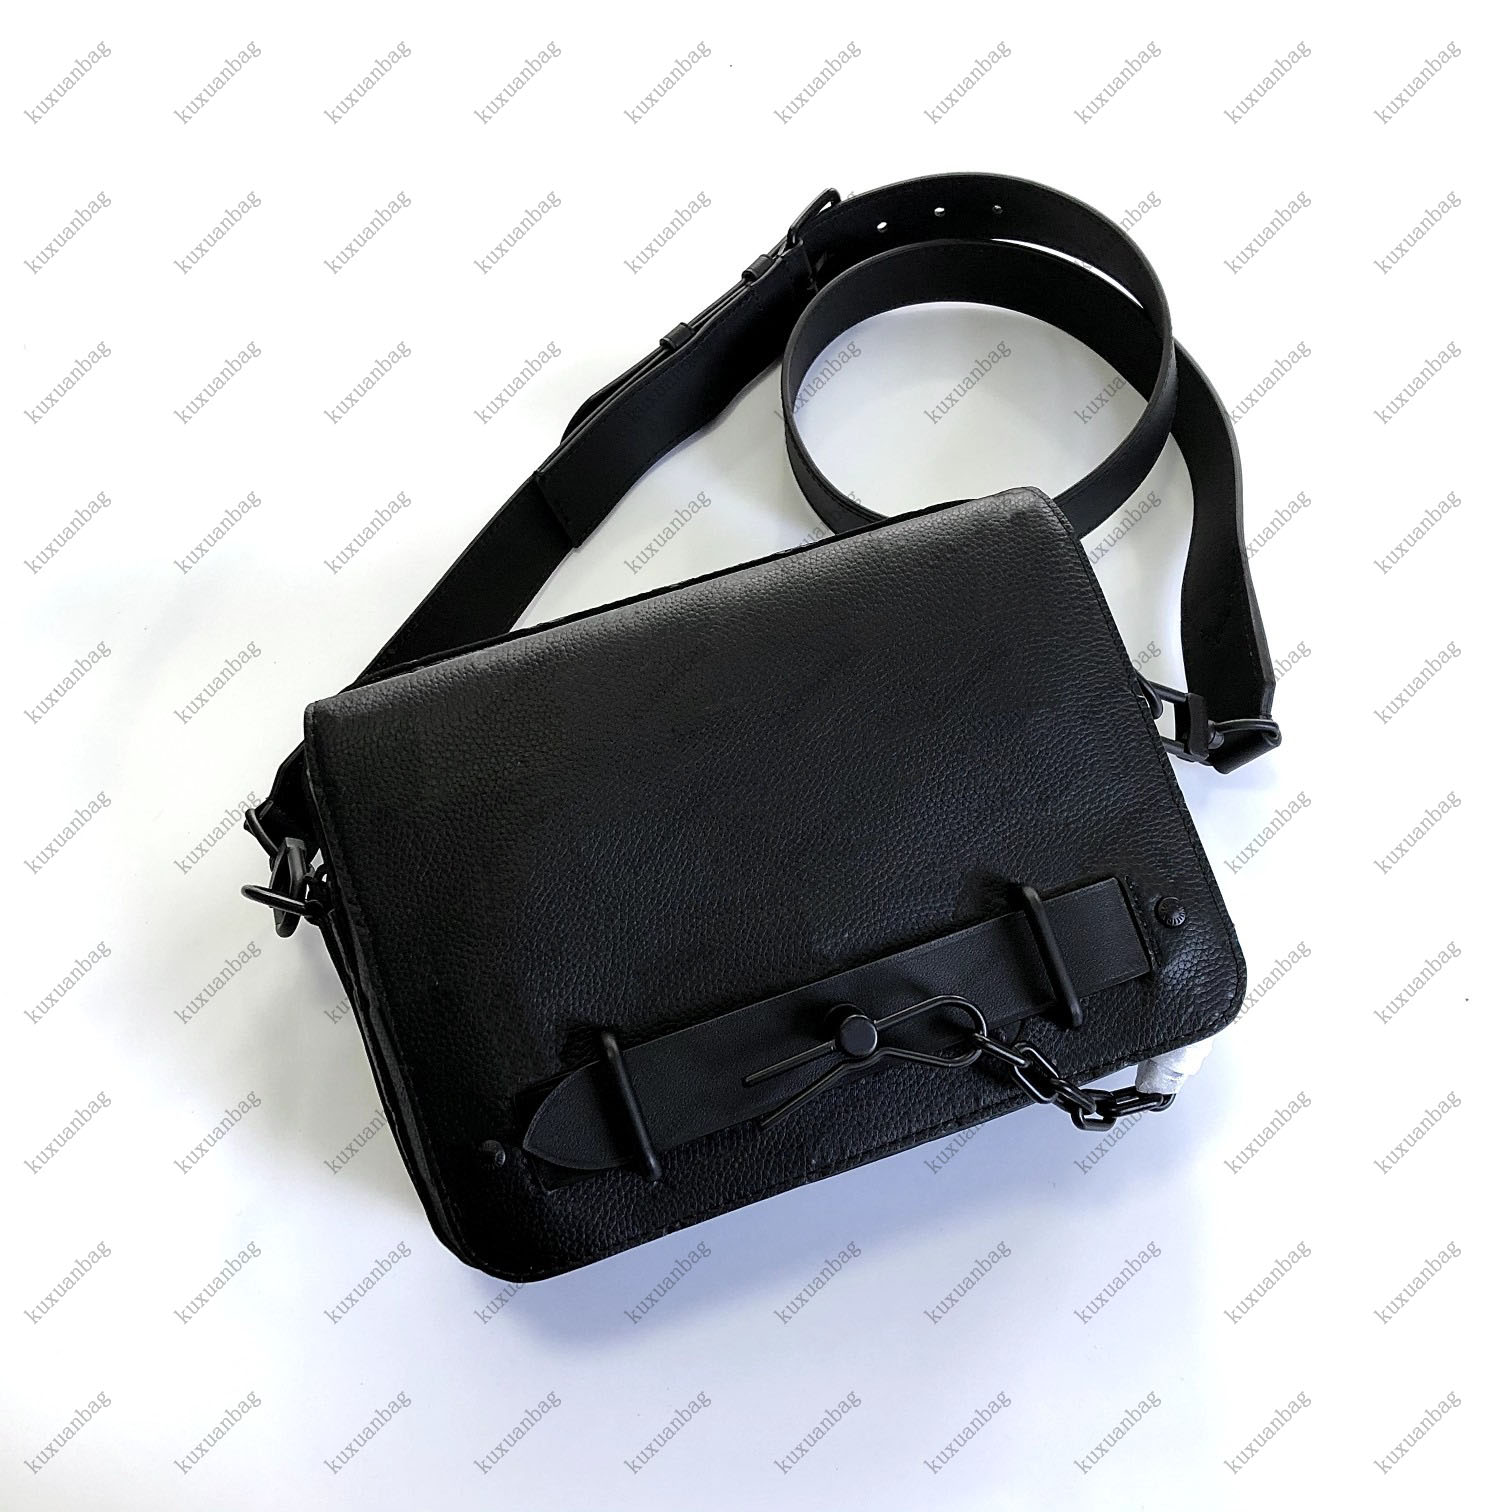 

2021fashion Shoulder bag 45585 Luxury Designer bags Messenger bag leather classic unique shape is the first choice of fashion men's daily collocation, Gift box